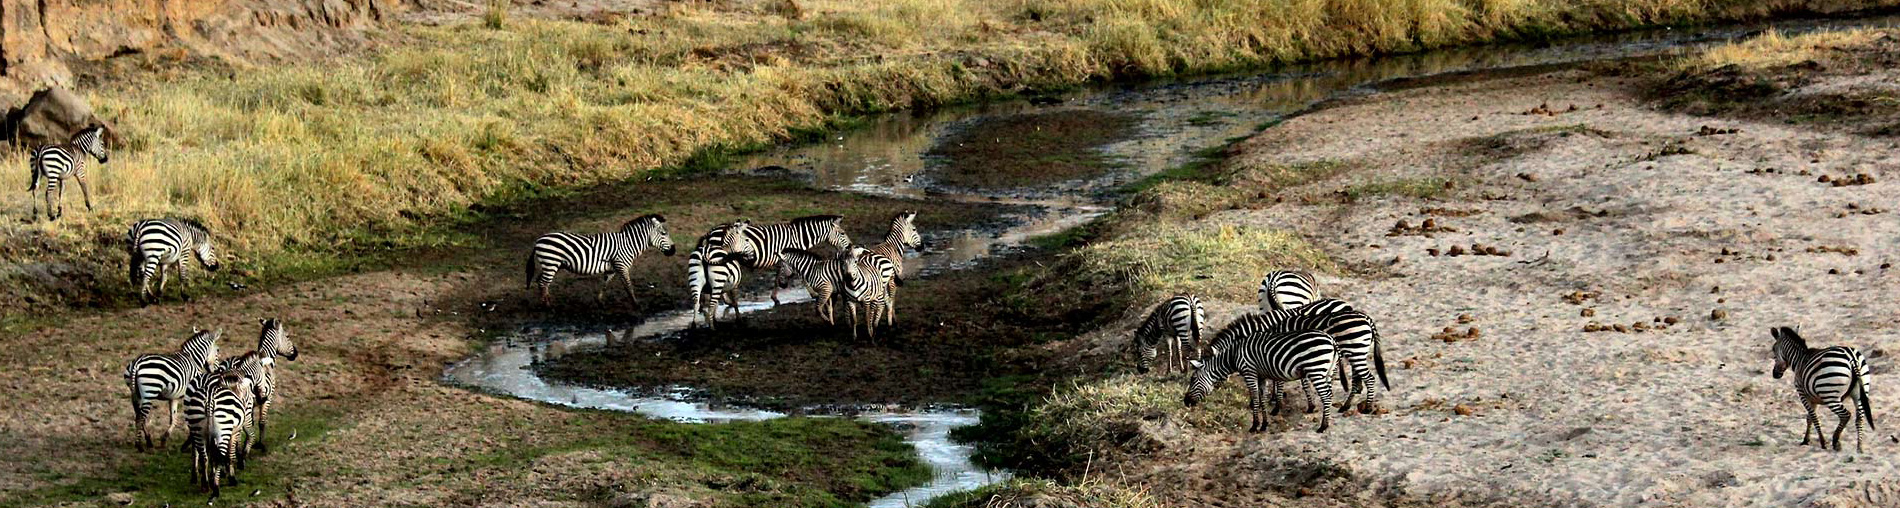 Tanzania Holiday Tour Packages From India